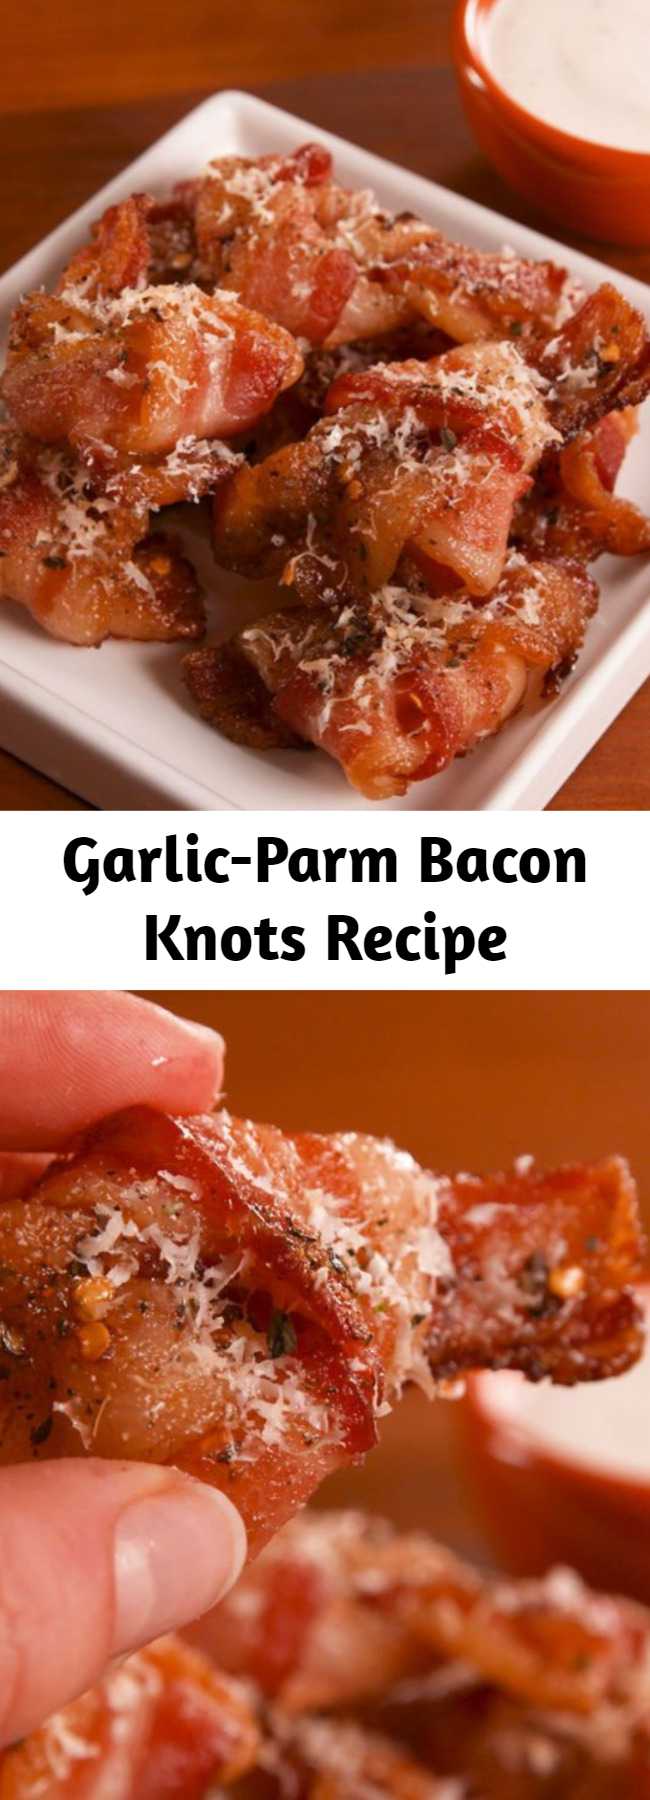 Garlic-Parm Bacon Knots Recipe - If you love garlic knots but HATE carbs, you need Garlic Parm Bacon Knots in your life STAT. You're KNOT going to believe these. #garlic #parm #parmesan #bacon #baconknots #lowcarb #lowcarbsnacks